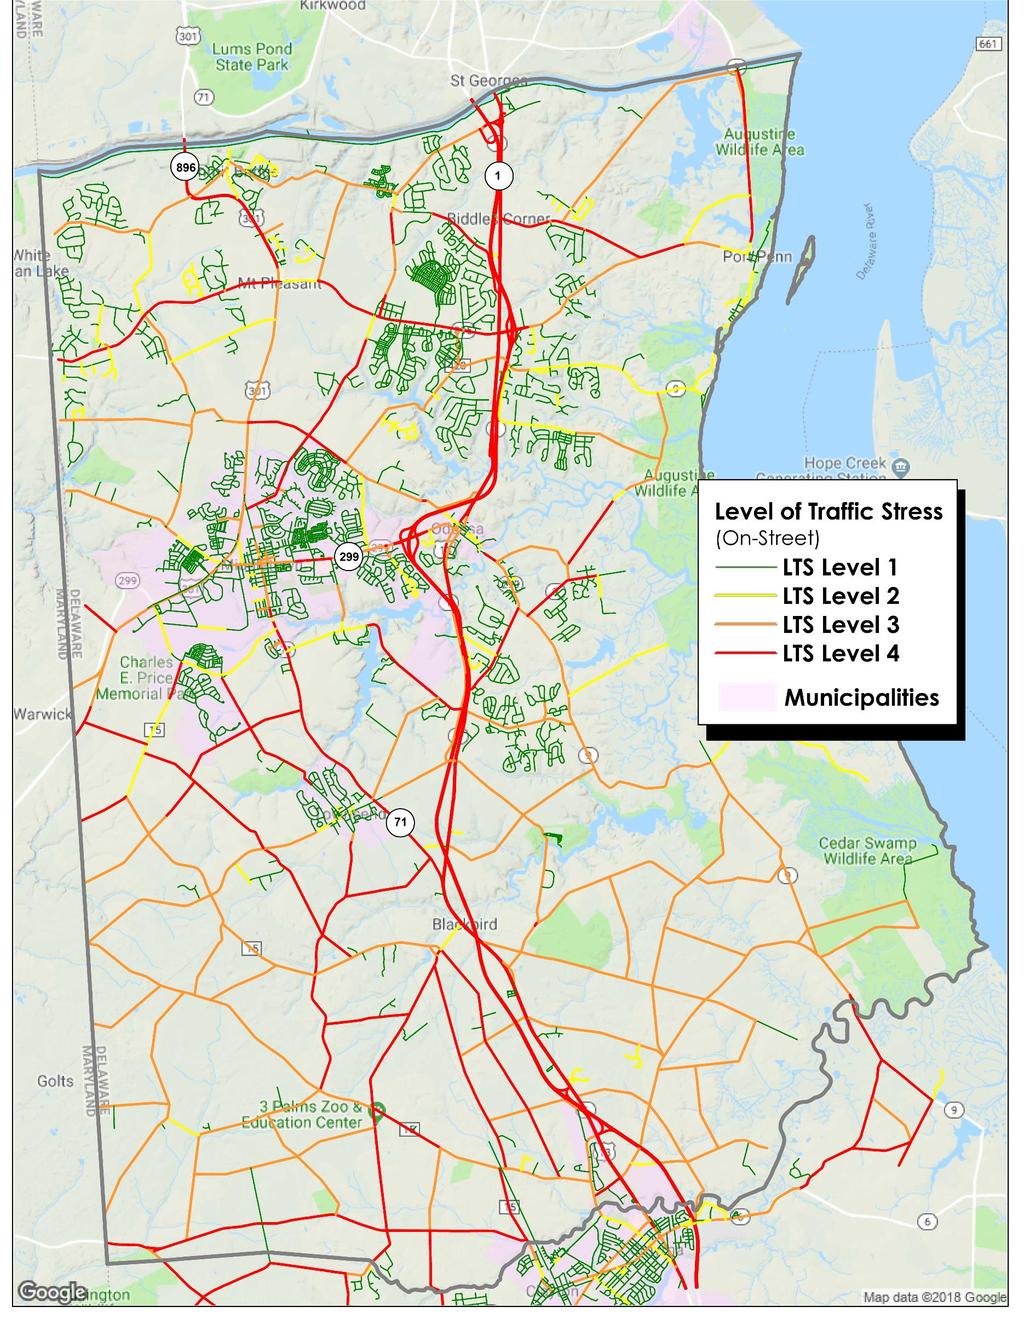 Demographic DelDOT Level changes of Traffic Stress (LTS) Analysis The Delaware Department of Transportation (DelDOT) has implemented a tool called Level of Traffic Stress (LTS) Analysis to help plan